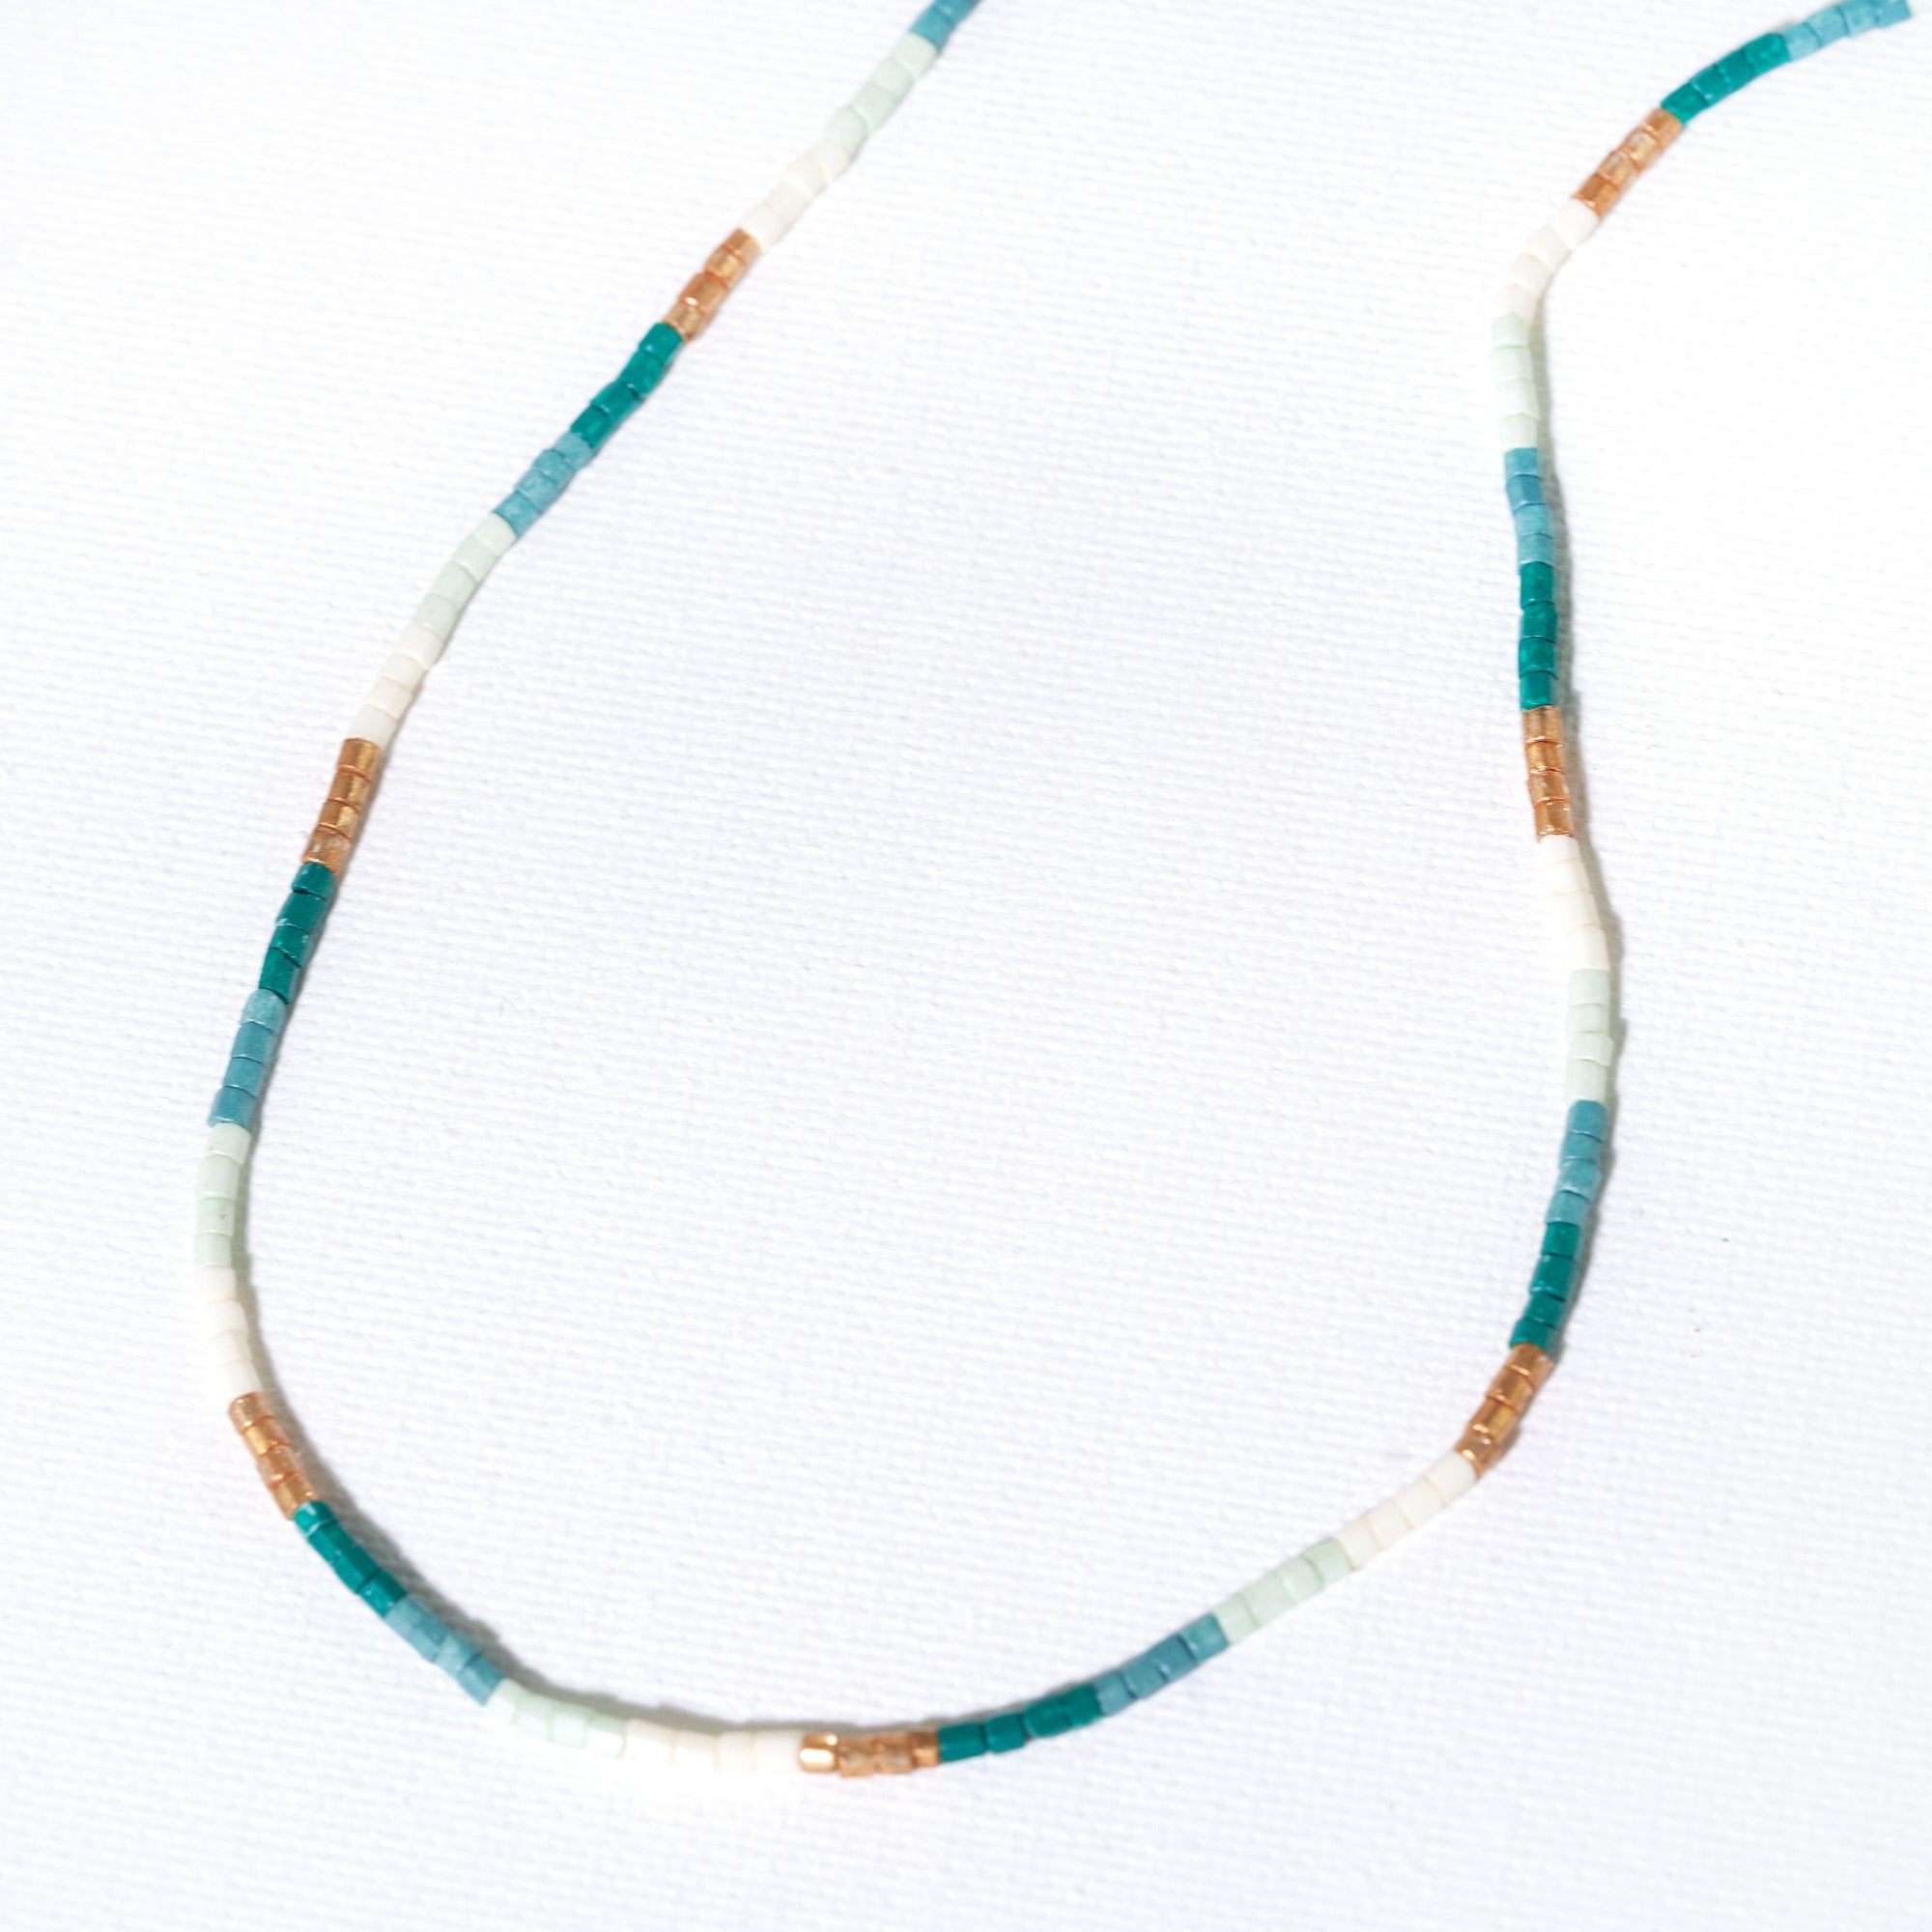 Everly Single Strand 2mm Luxe Bead Necklace Emerald Wholesale